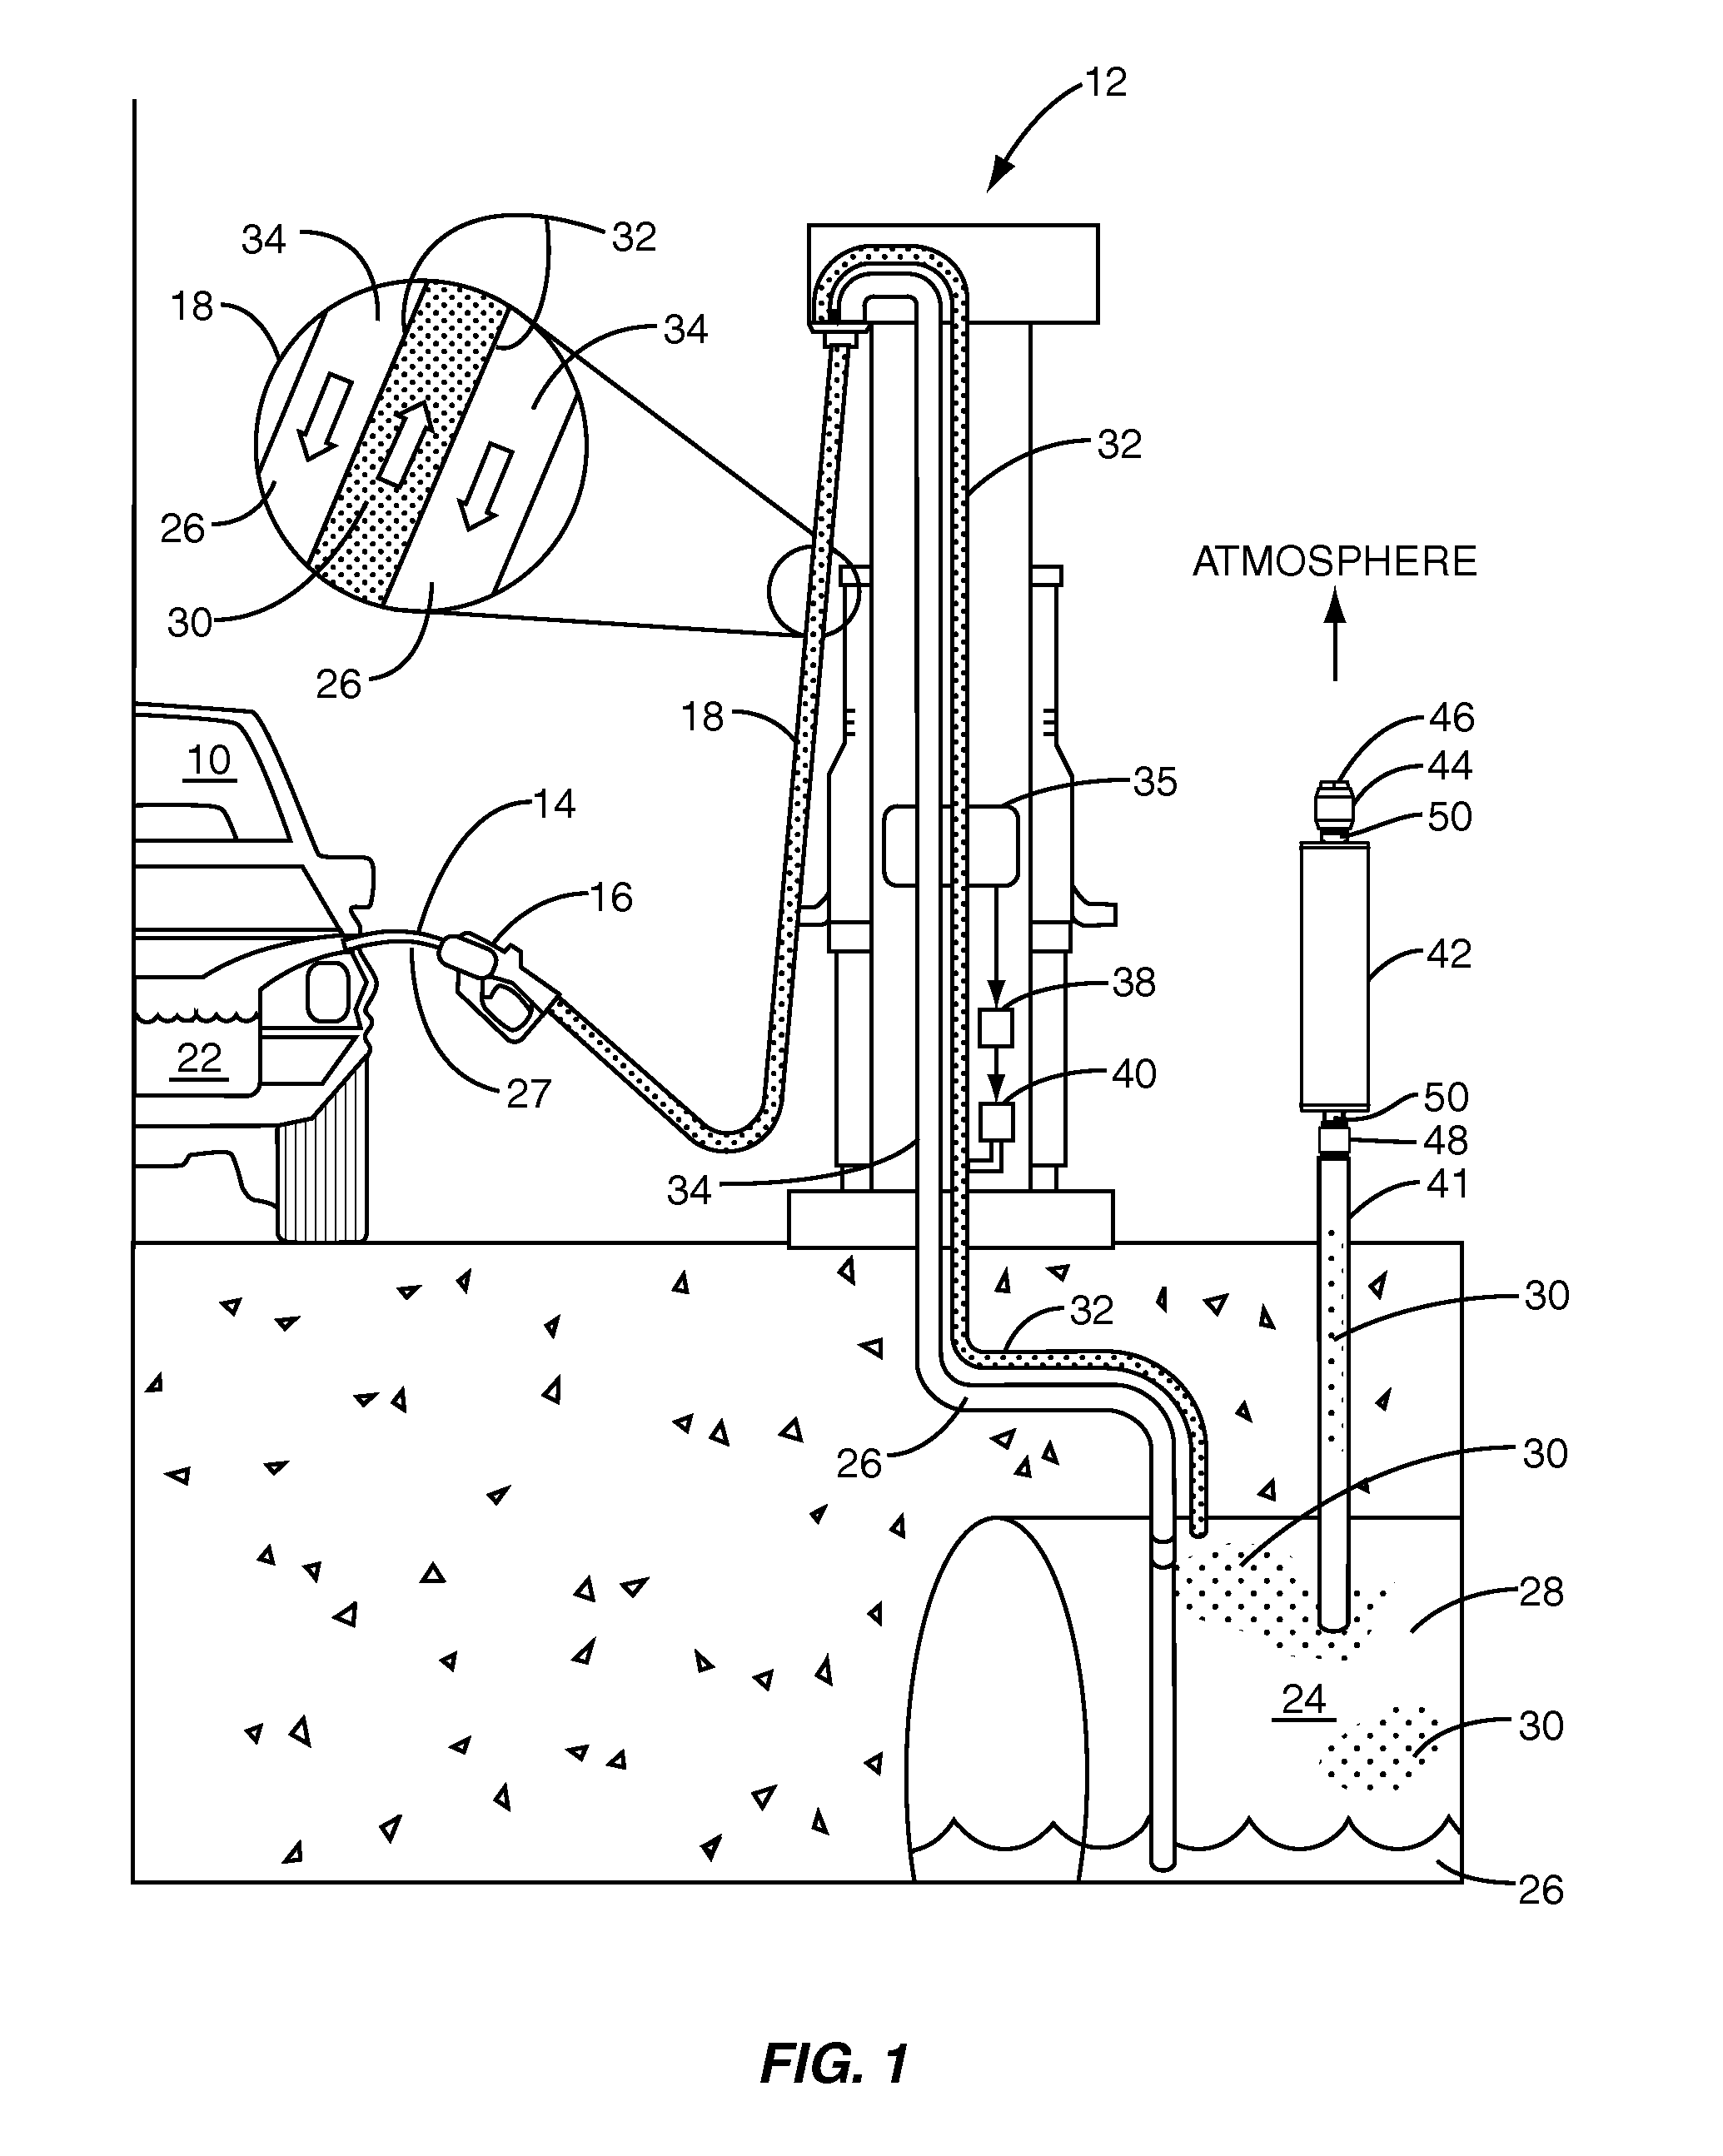 Fuel storage tank pressure management system and method employing a carbon canister